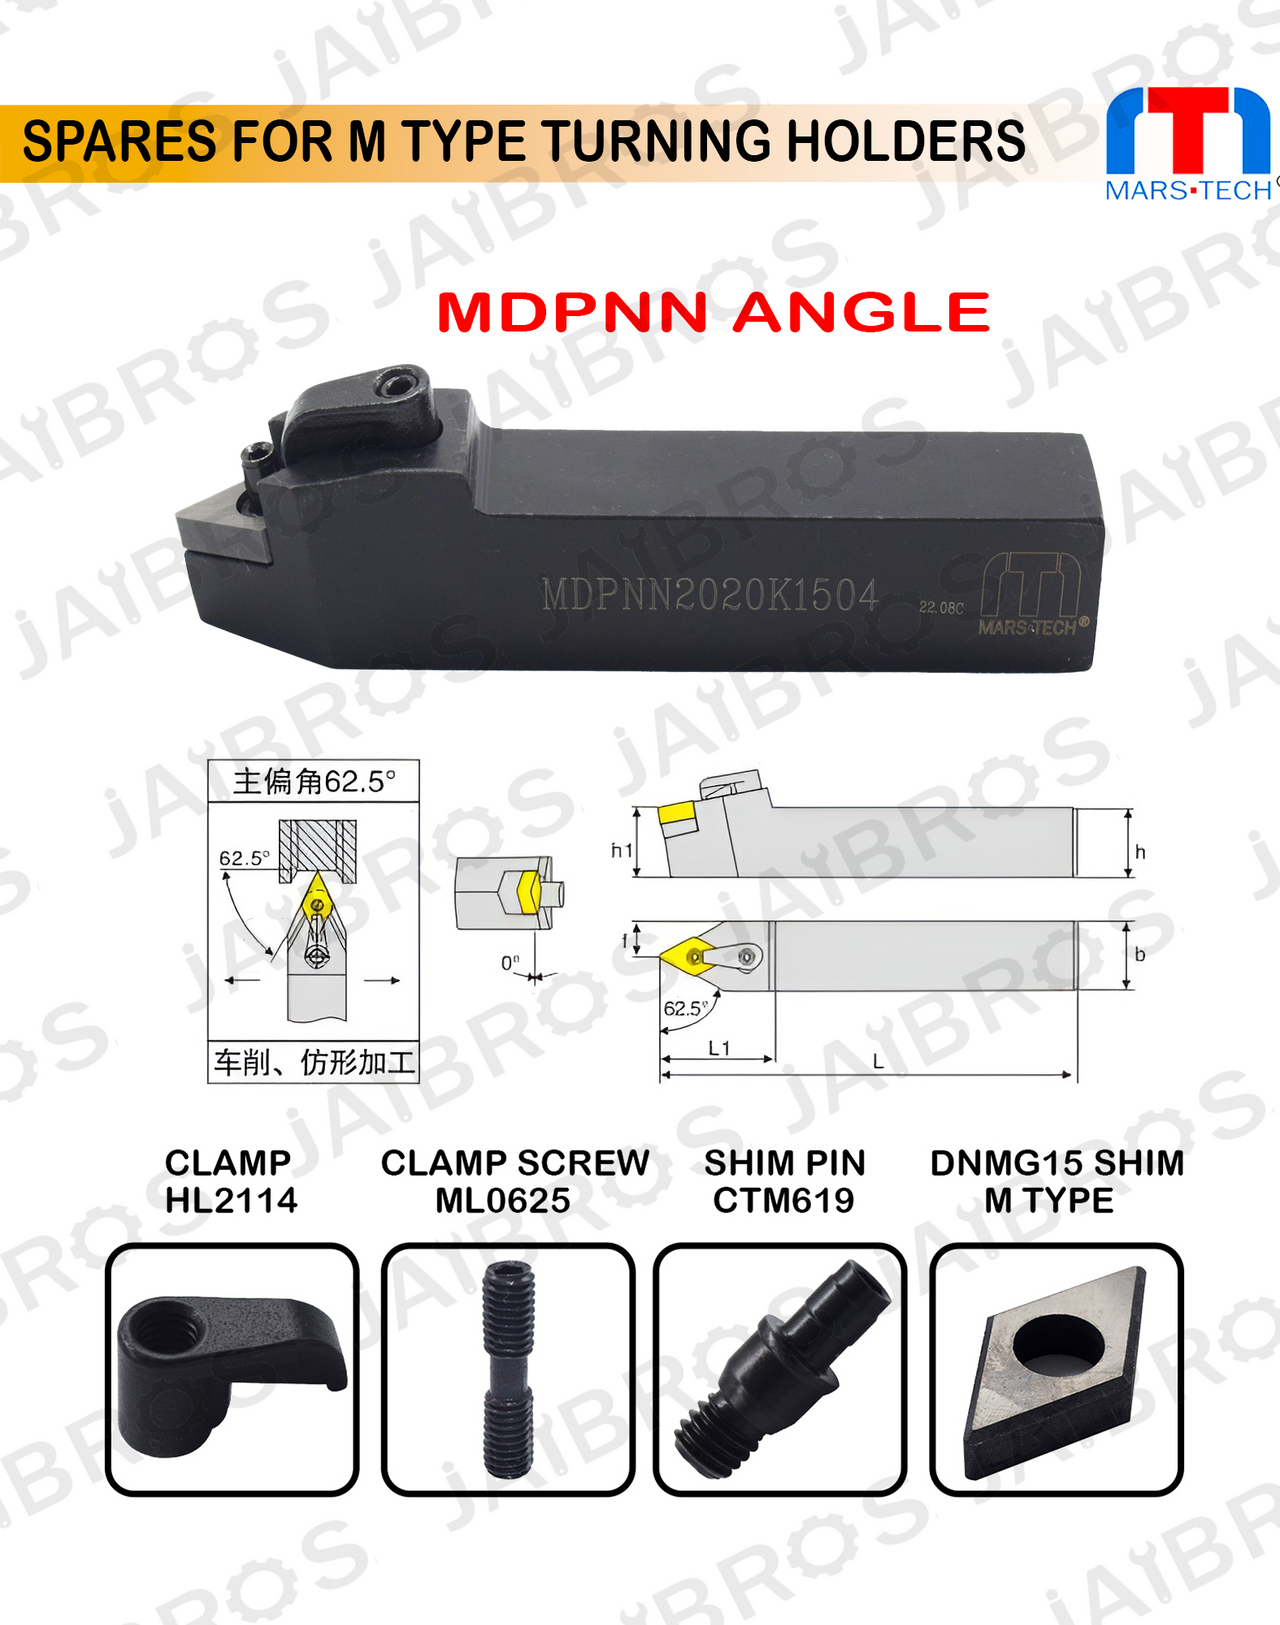 MDPNN -dnmg1506 neutral tool m type pack of 1